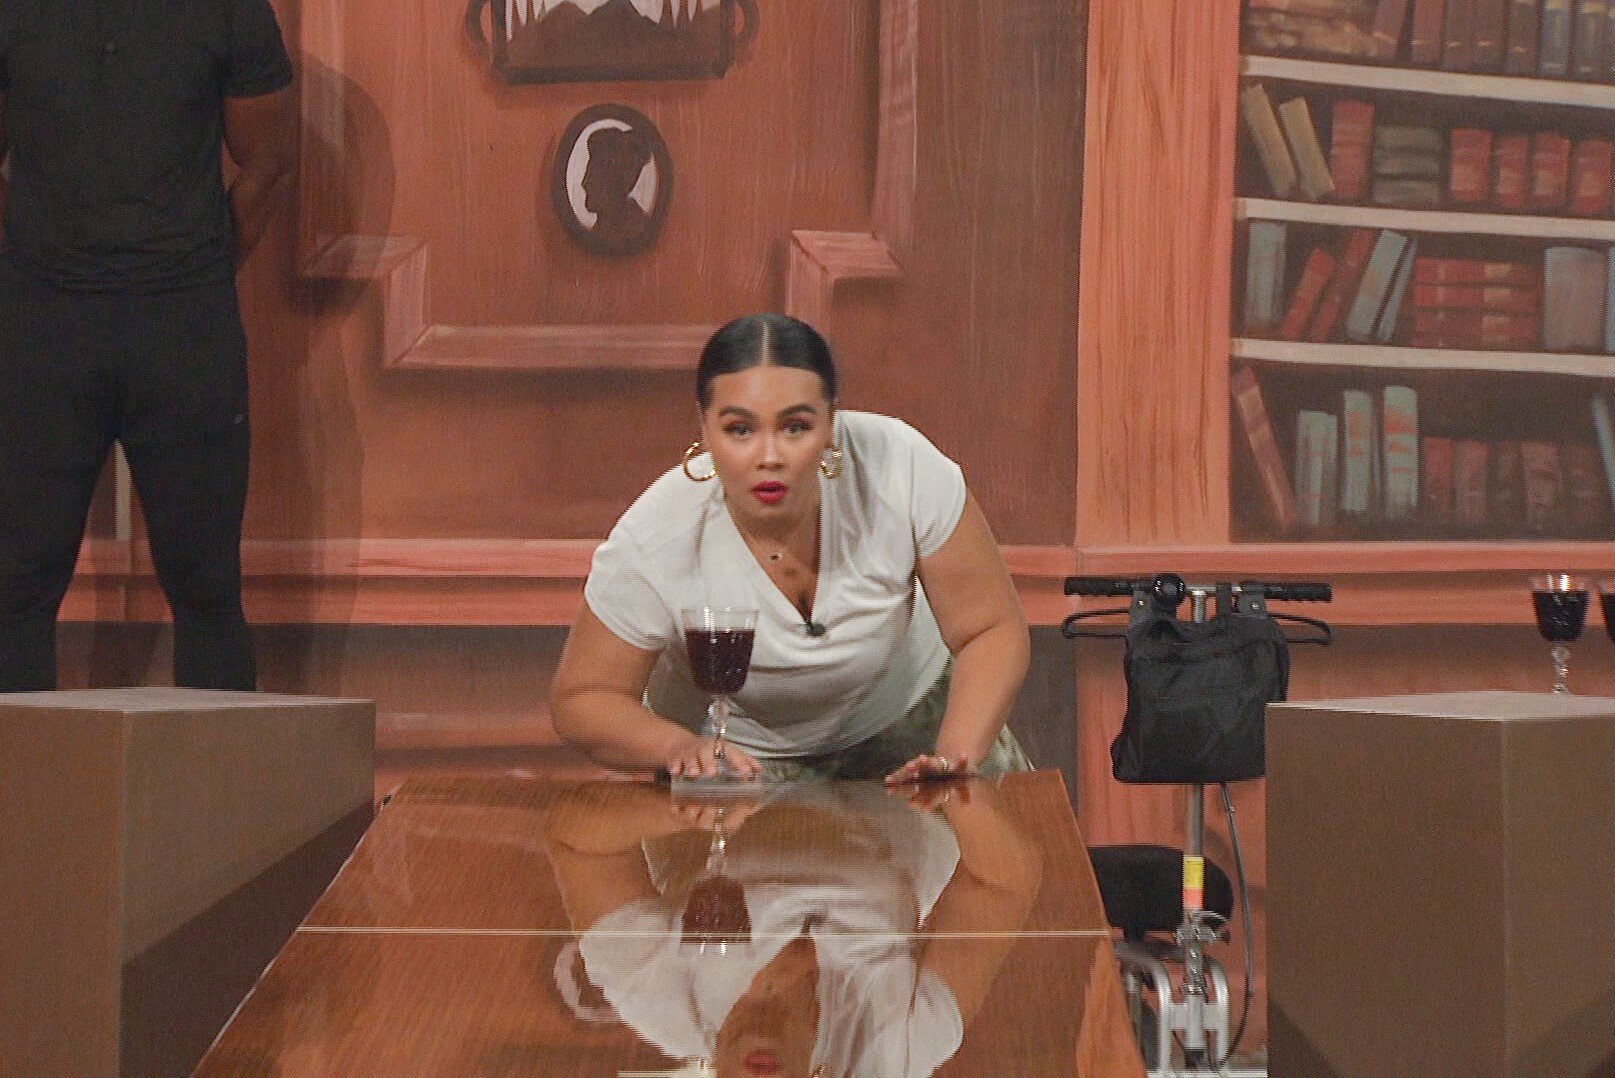 Jasmine Davis competes in a Head of Household competition during 'Big Brother 24' on CBS. Jasmine wears a light blue shirt while trying to slide a glass down a table.